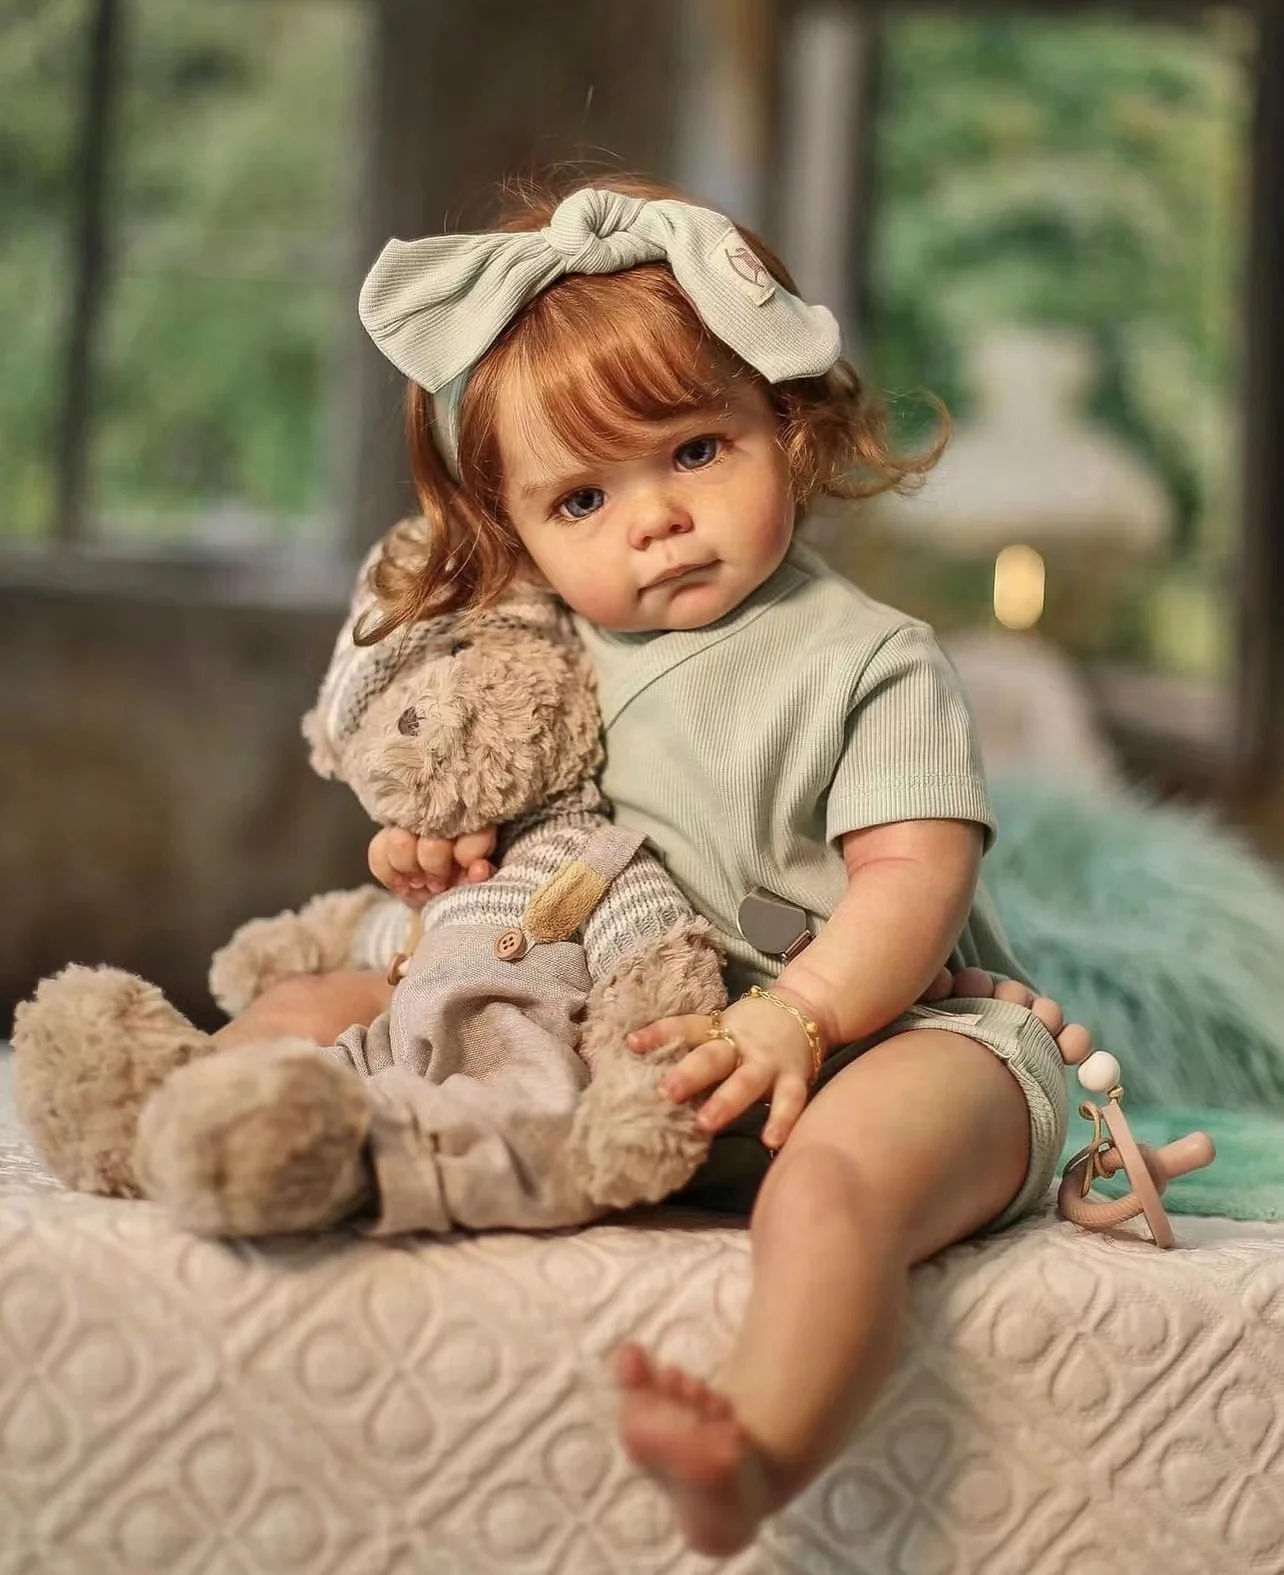 Wholesale 55CM Maggie Reborn Baby Lifelike Real Soft Touch High Quality Collectible Art Doll with Rooted Hair Bebe Reborn From m.alibaba.com